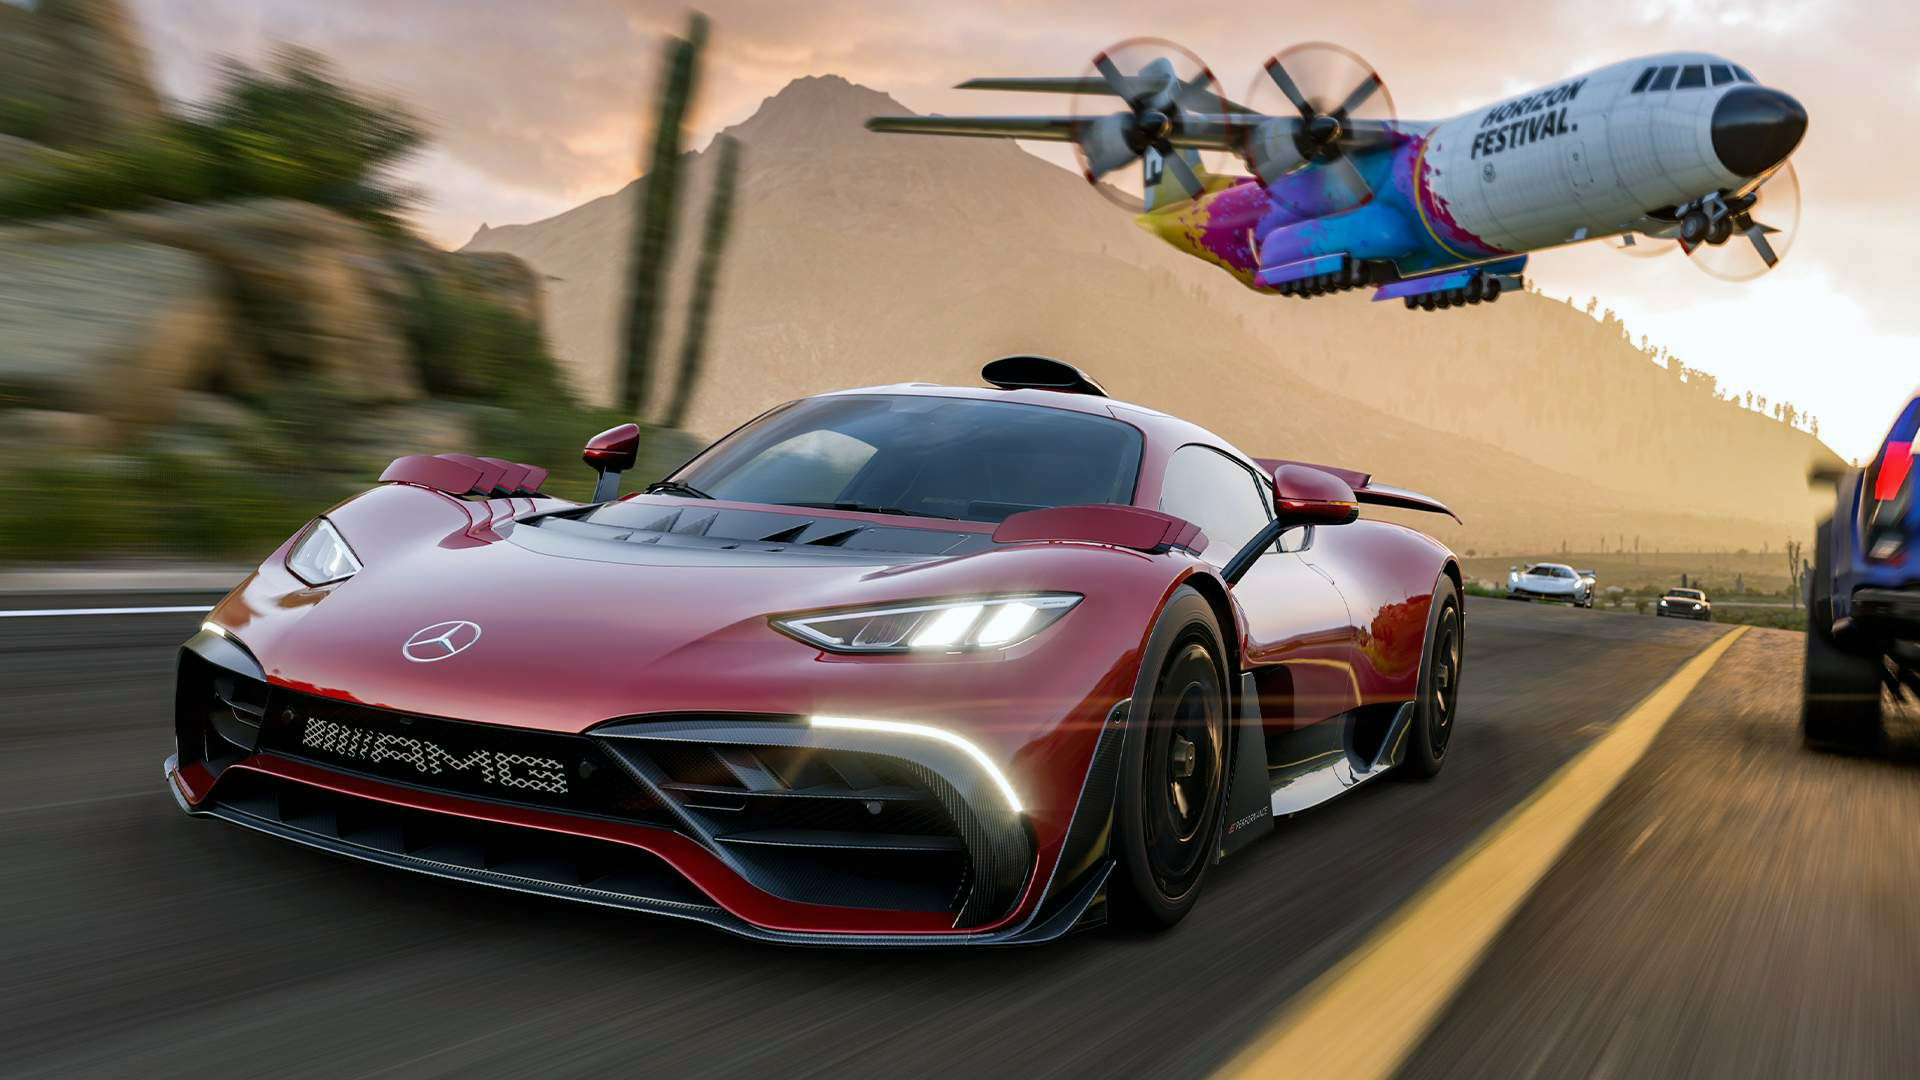 Forza Horizon 5 has 800,000 players and it's not even out yet